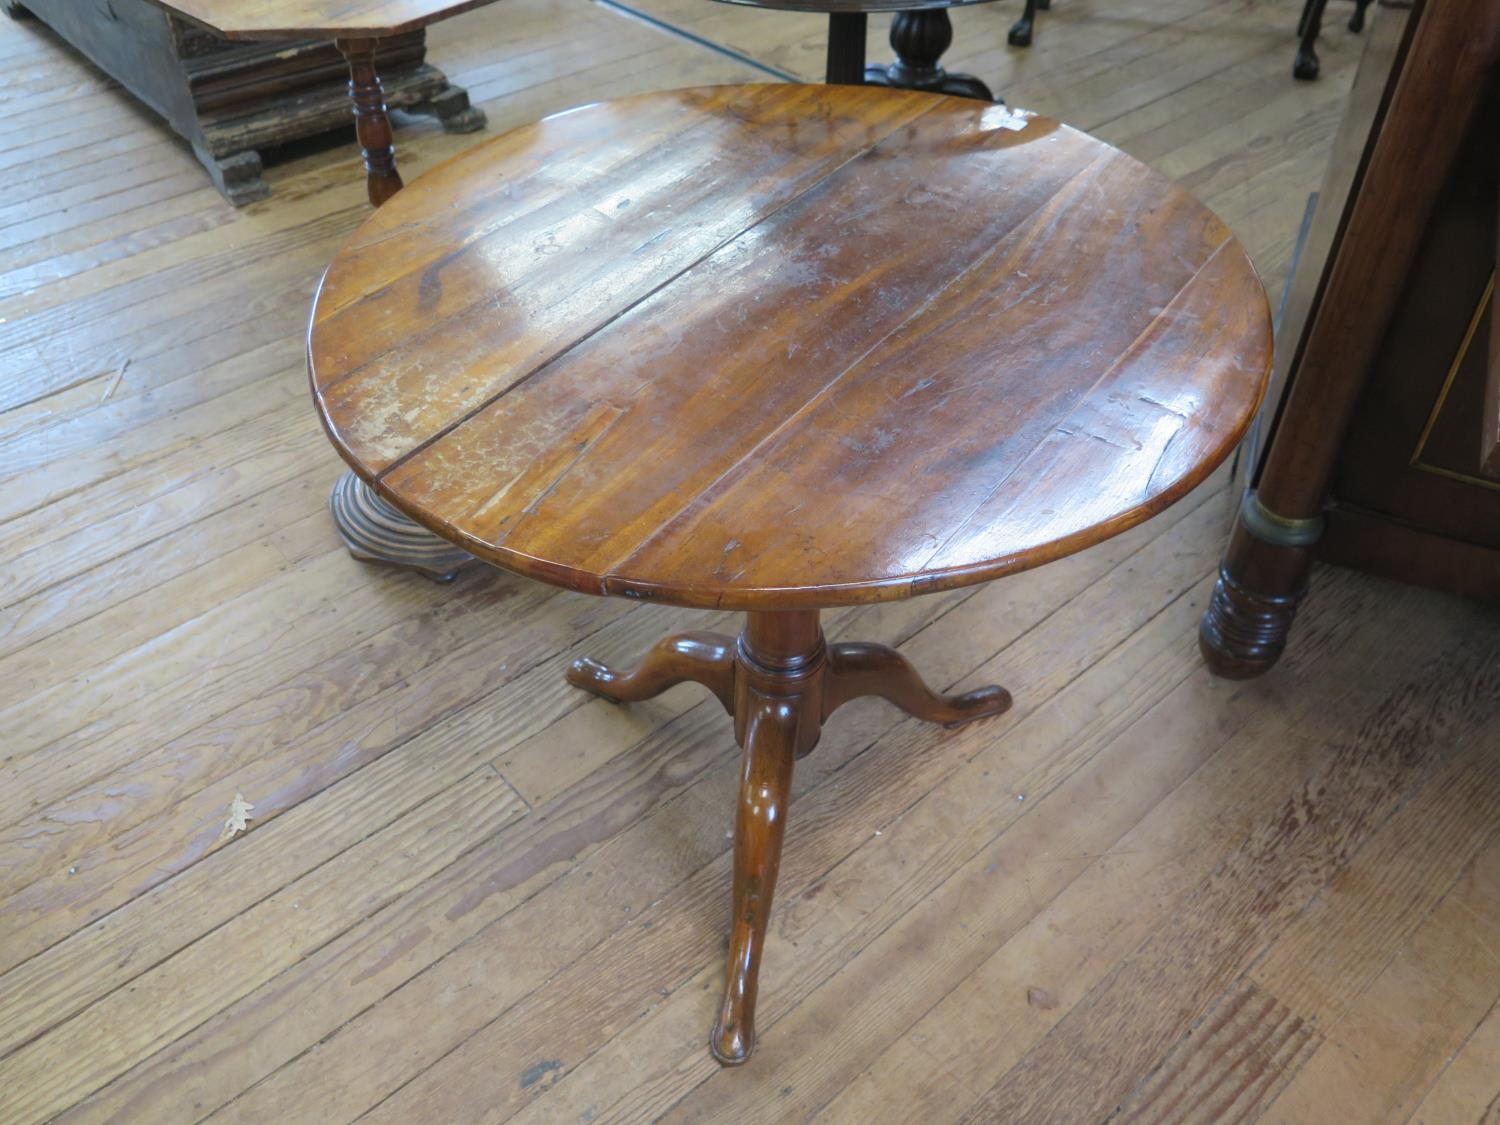 A George III mahogany Tripod Table. late 18th century. With large open rub joint to top. 65cm x 75cm - Image 2 of 2